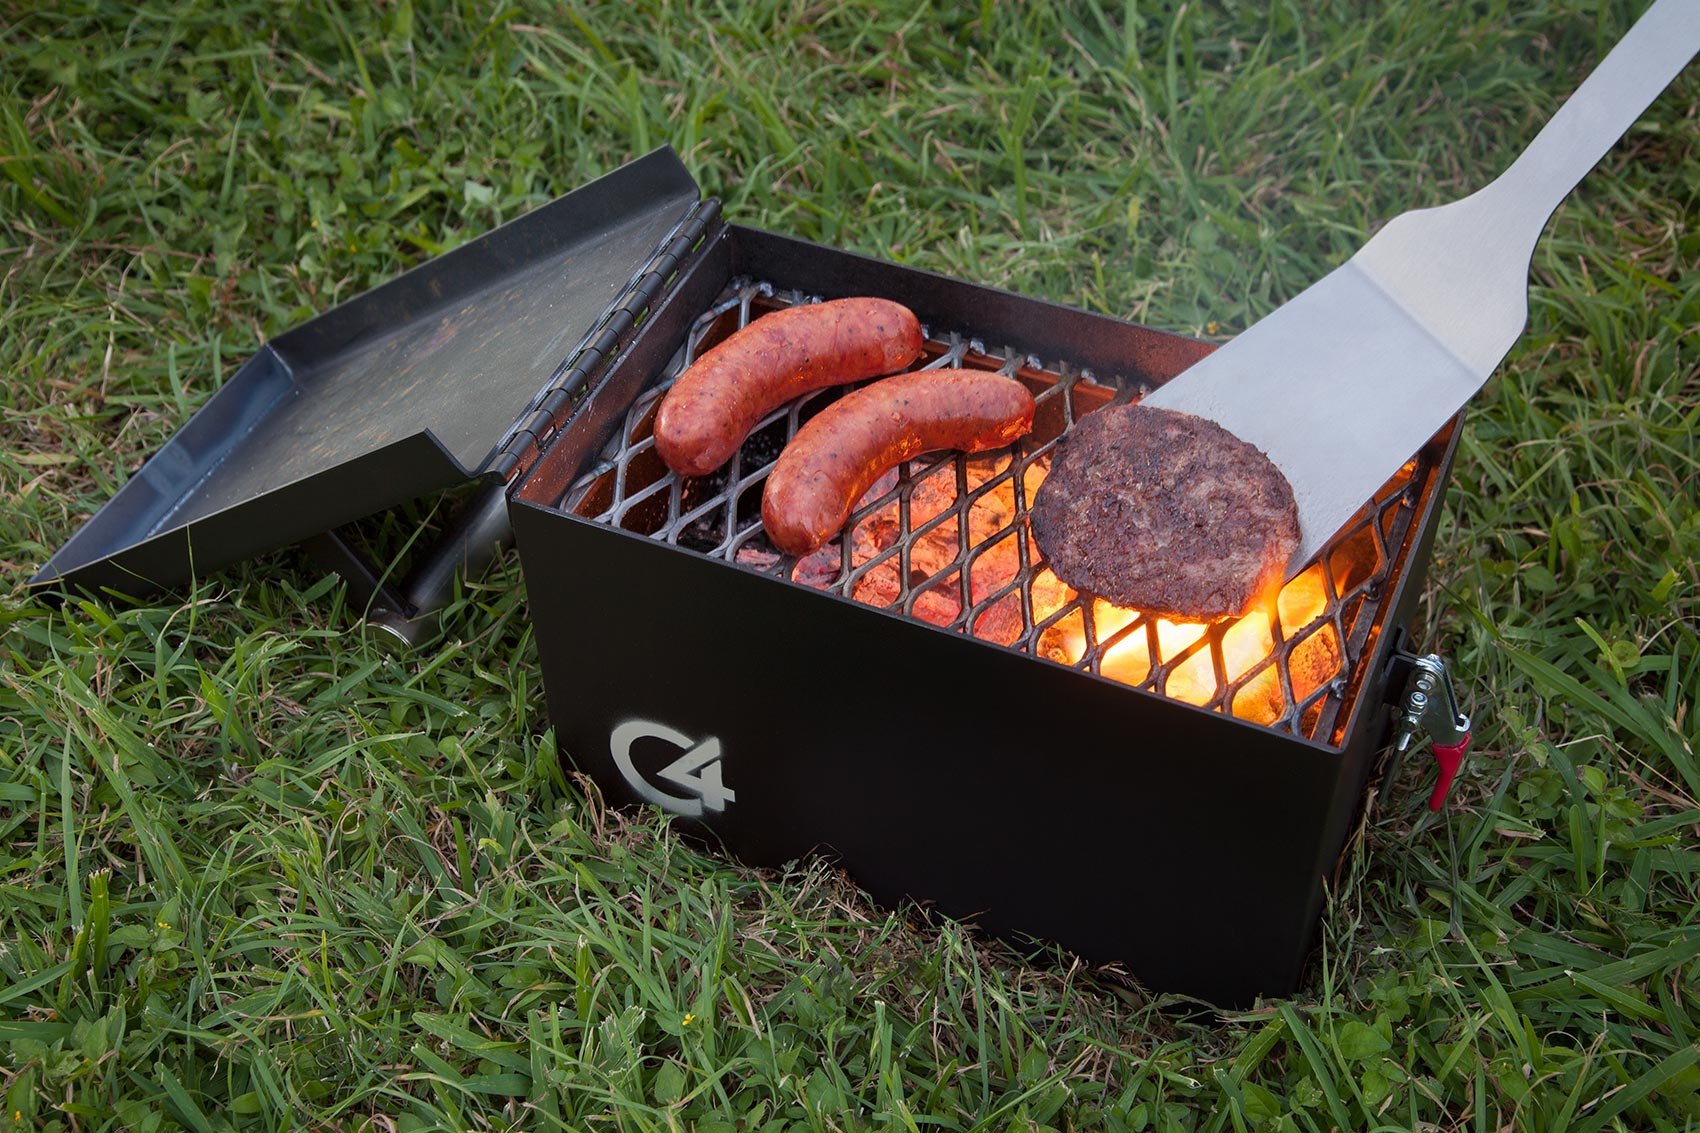 C4 Portable Grill In Action